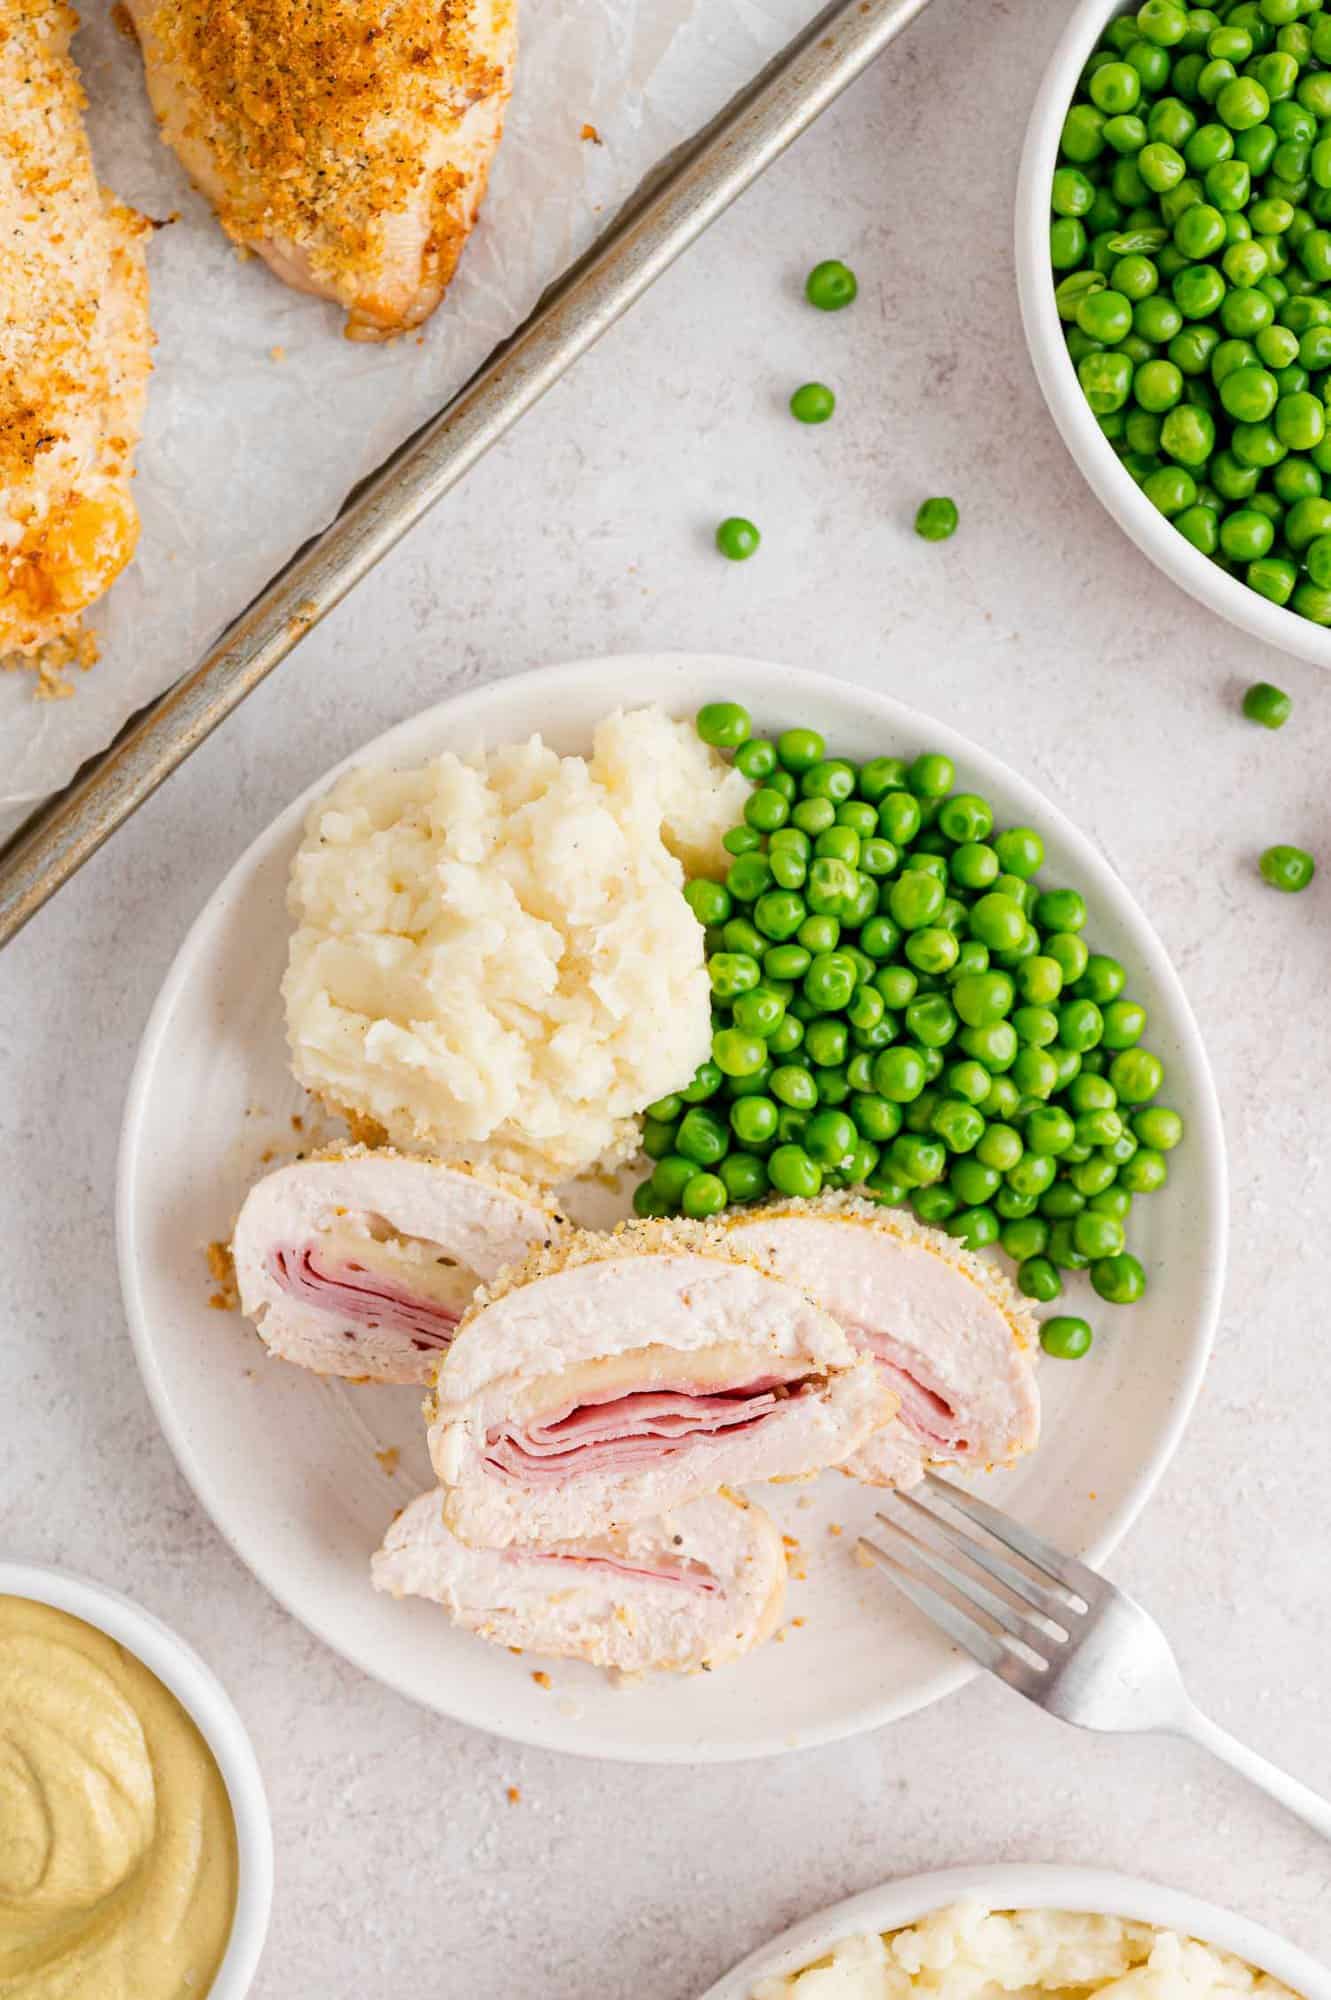 Sliced chicken cordon bleu to show filling, on a plate with peas and potatoes.